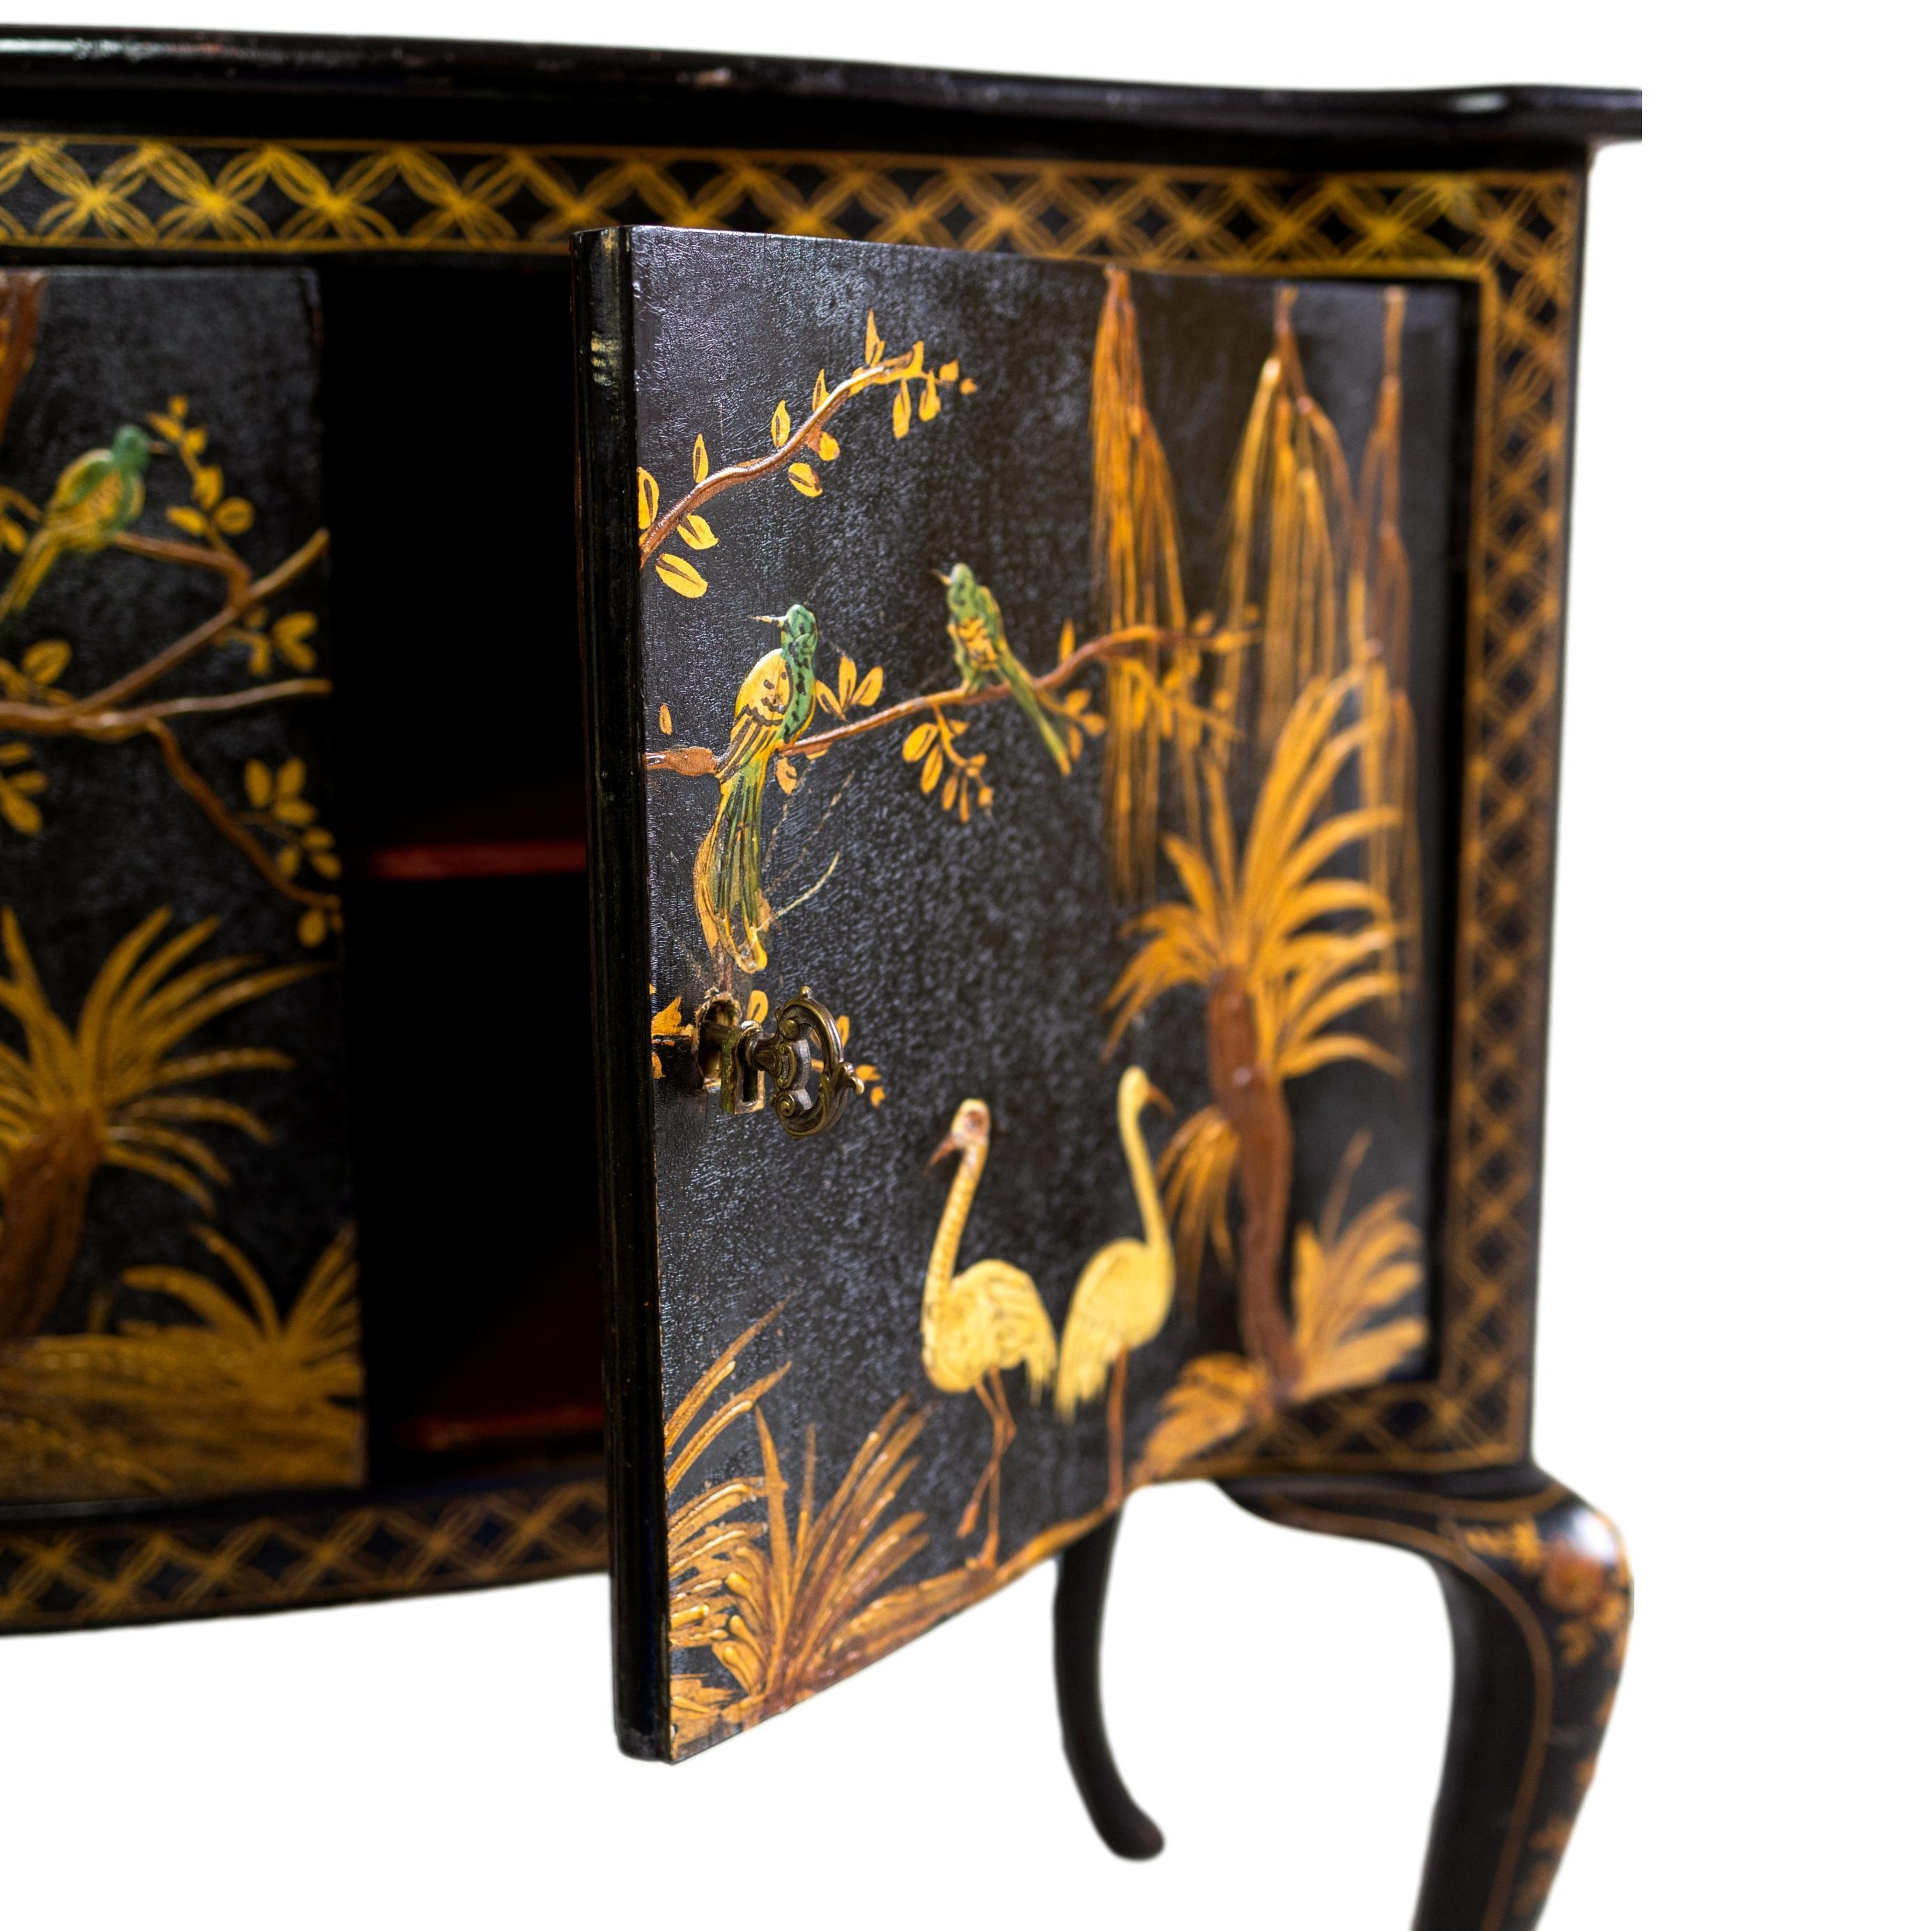 A Black Lacquered and Chinoiserie-Decorated Serpentine Cabinet, the top decorated with Chinese figures in a landscape, the two cabinet doors with a pair of cranes and bluebirds in a stylized landscape, the bowed sides similarly decorated, one with